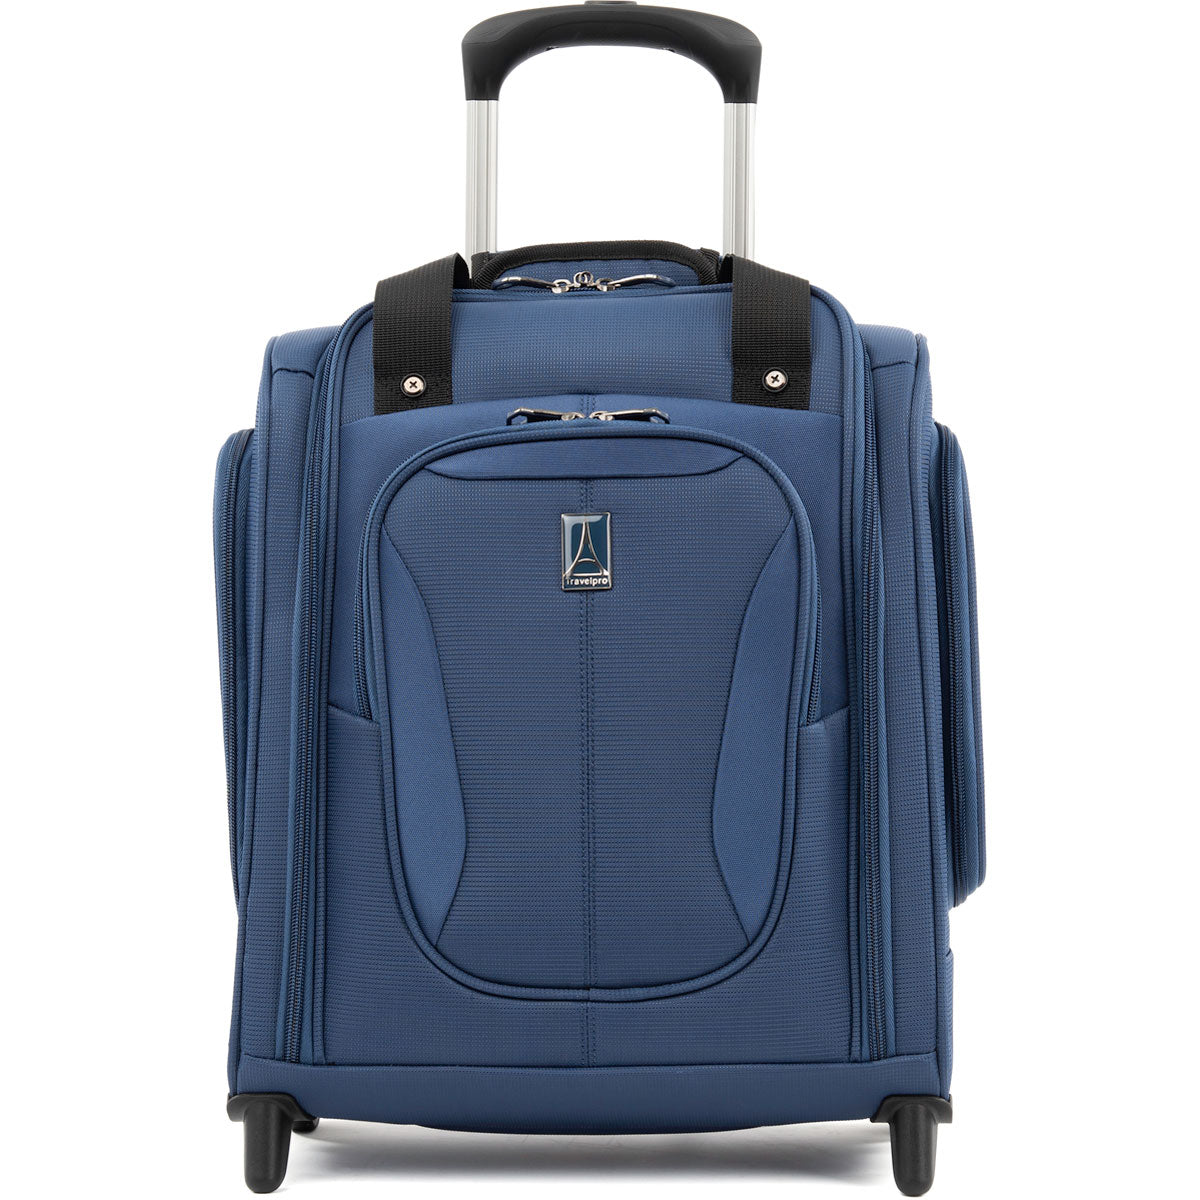 travelpro underseat carry on